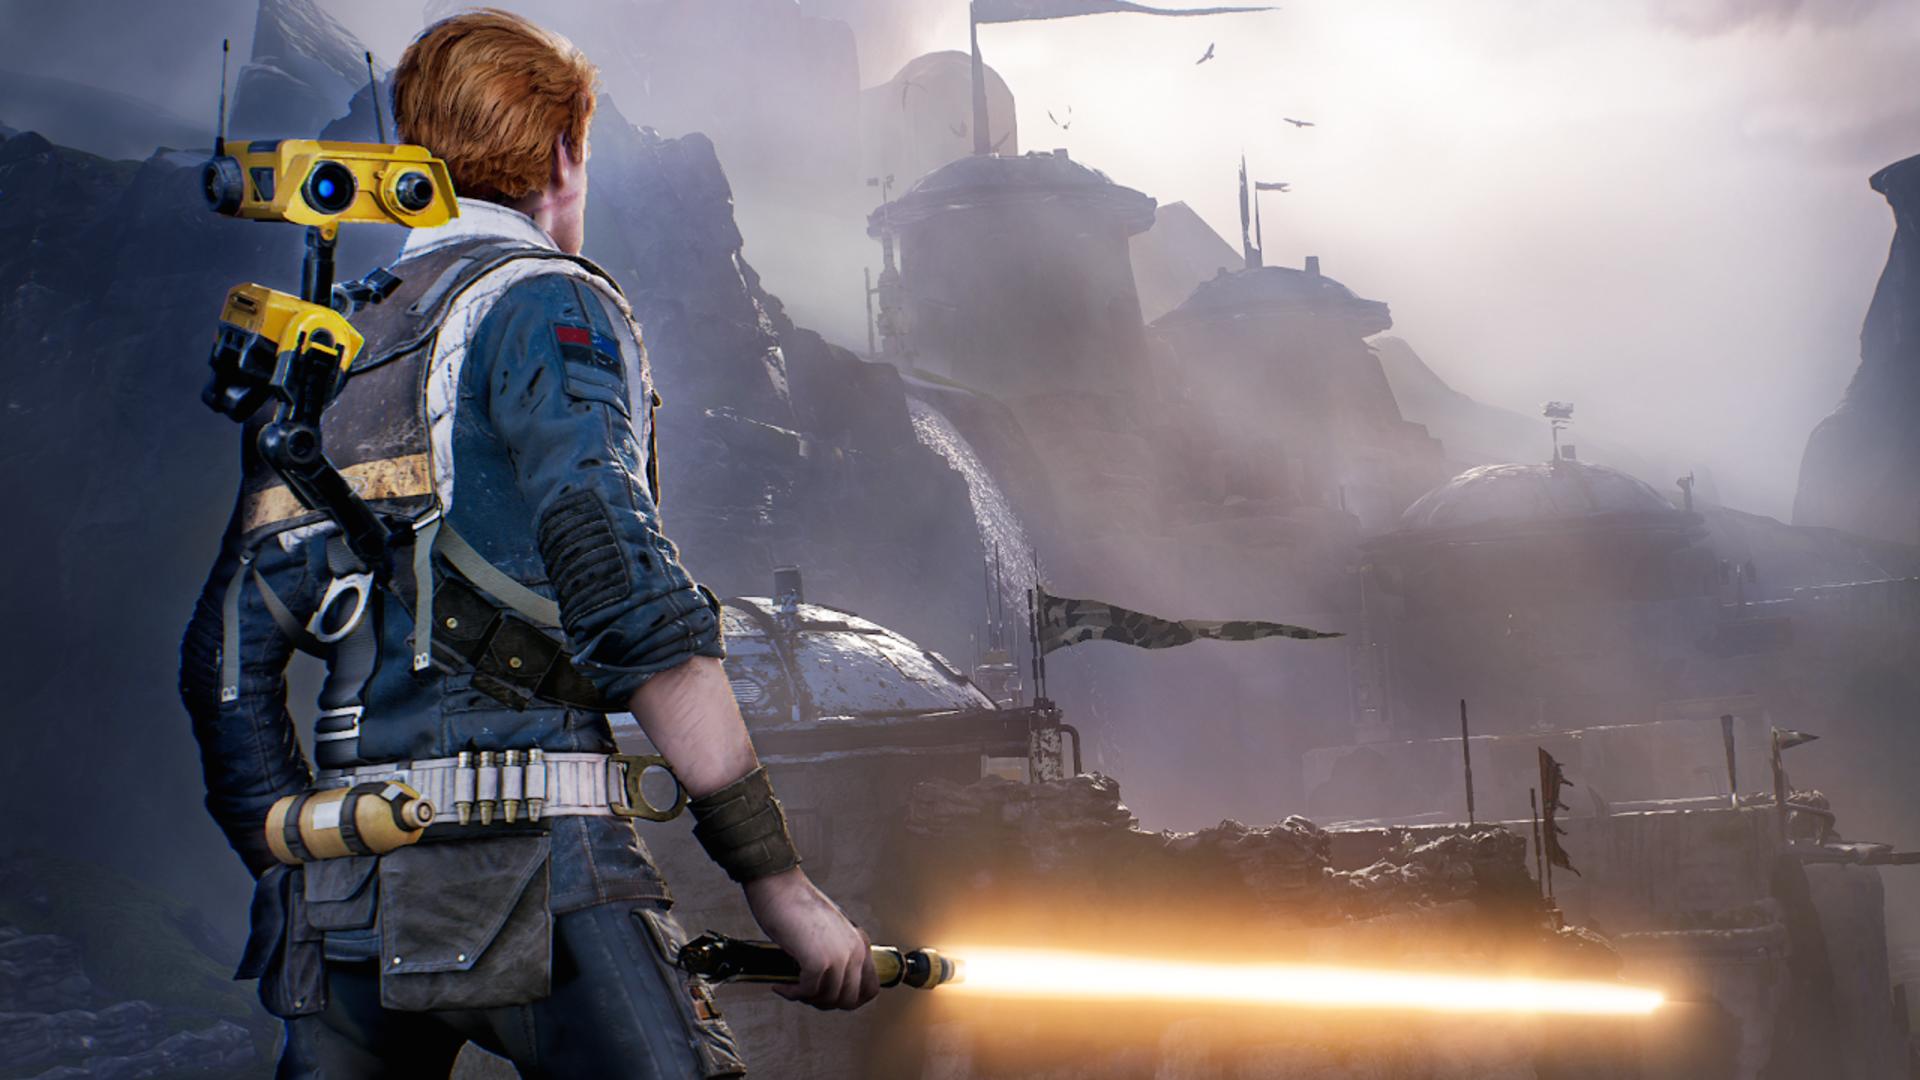 Everyone Can Have an Orange Lightsaber in Star Wars Jedi: Fallen Order Now, As a Treat